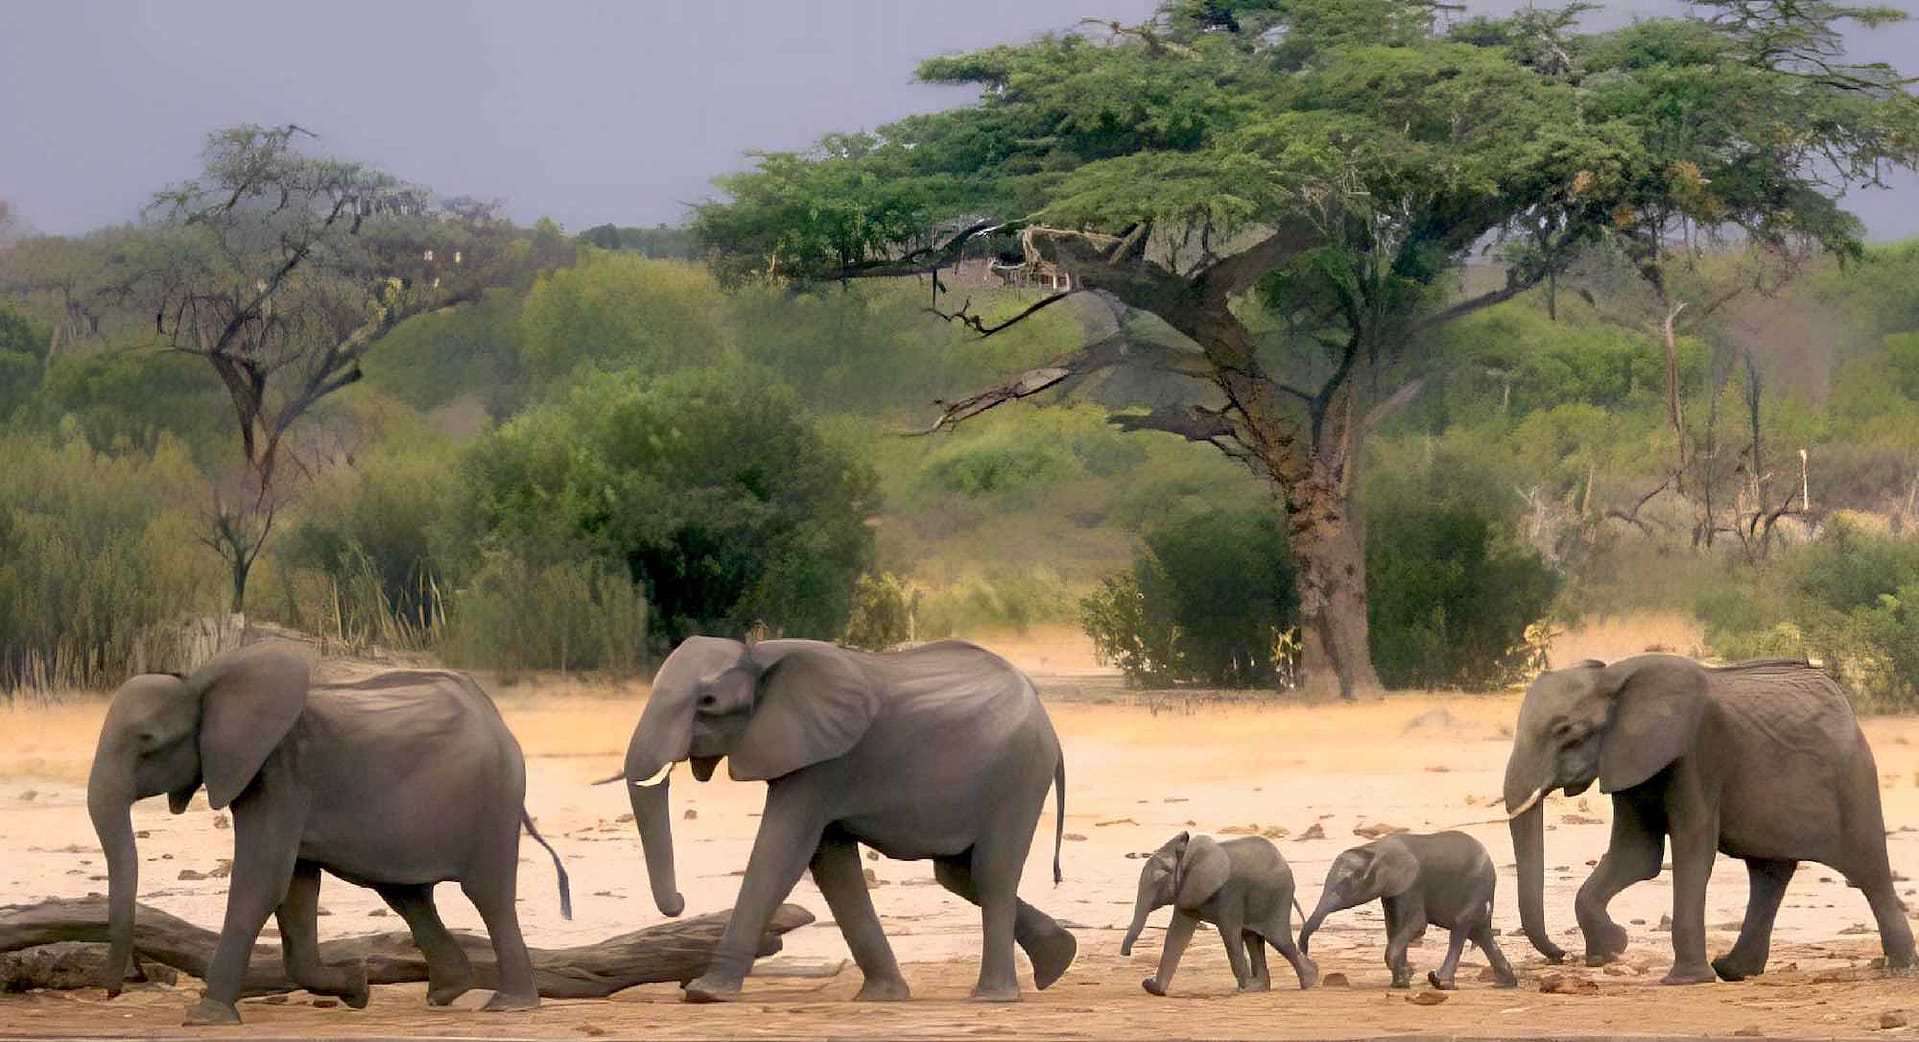 Two adult elephants lead two youngsters across a sandy patch with another adult in the rear.